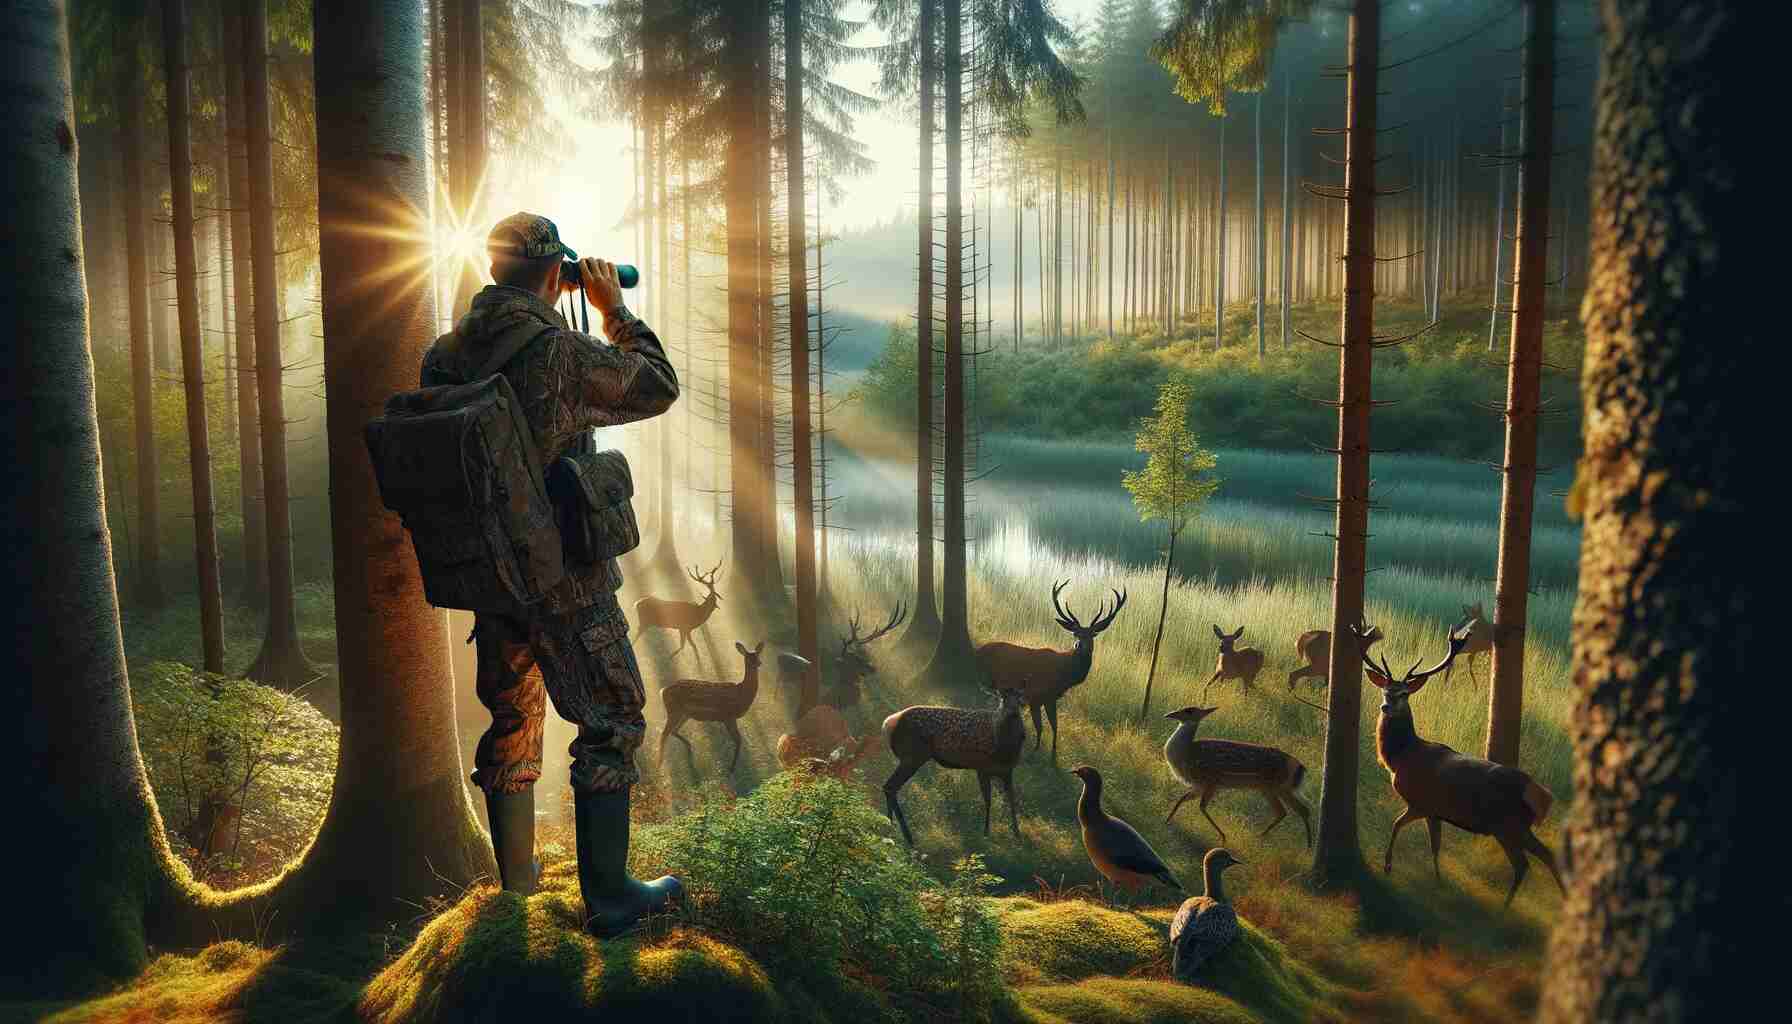 Serene forest landscape at dawn with soft sunlight filtering through trees. In the foreground, a responsible hunter in camouflage observes wildlife through binoculars, surrounded by diverse wildlife including deer and birds in their natural habitat, highlighting the respect for nature and wildlife conservation.